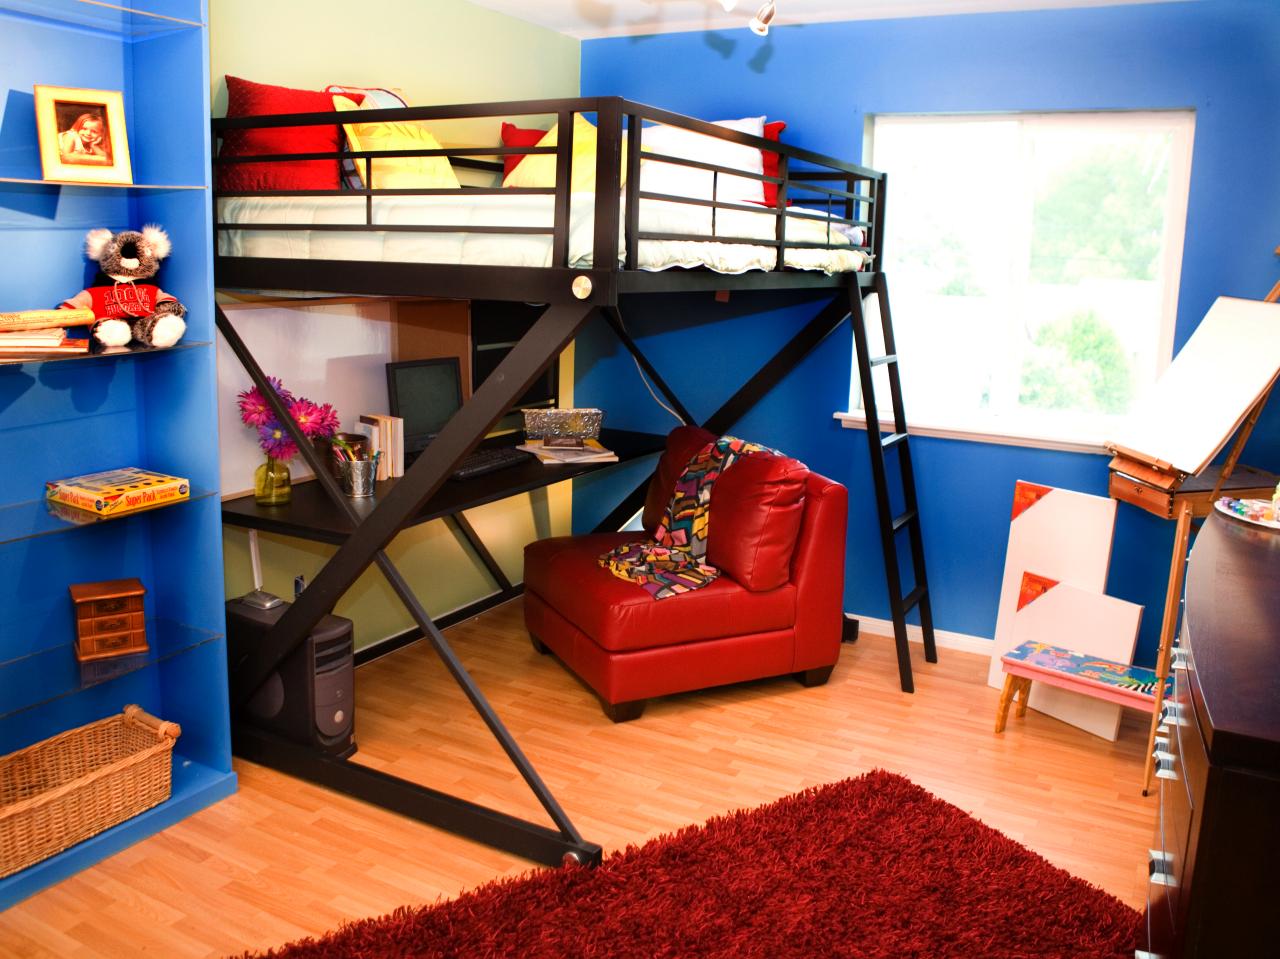 Candice S Design Tips Kids Room, Bunk Bed Decorating Tips